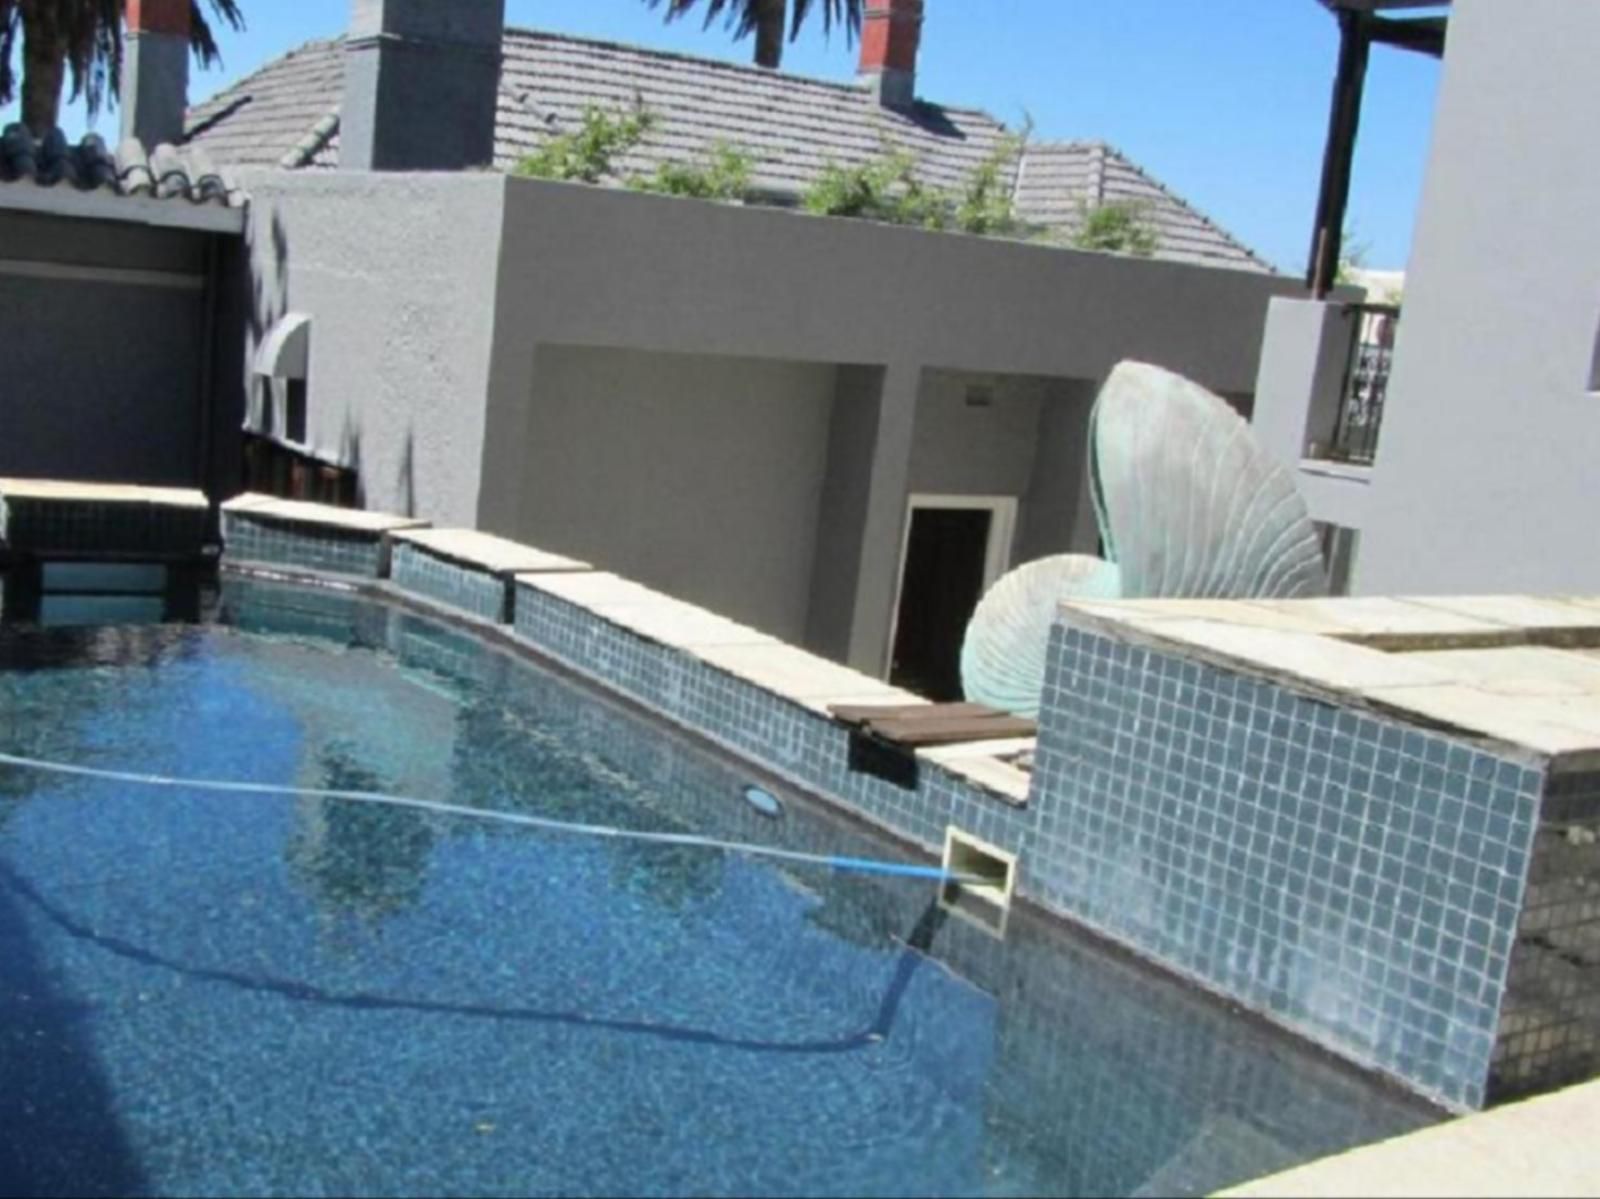 Cape Riviera Oranjezicht Cape Town Western Cape South Africa House, Building, Architecture, Palm Tree, Plant, Nature, Wood, Garden, Swimming Pool